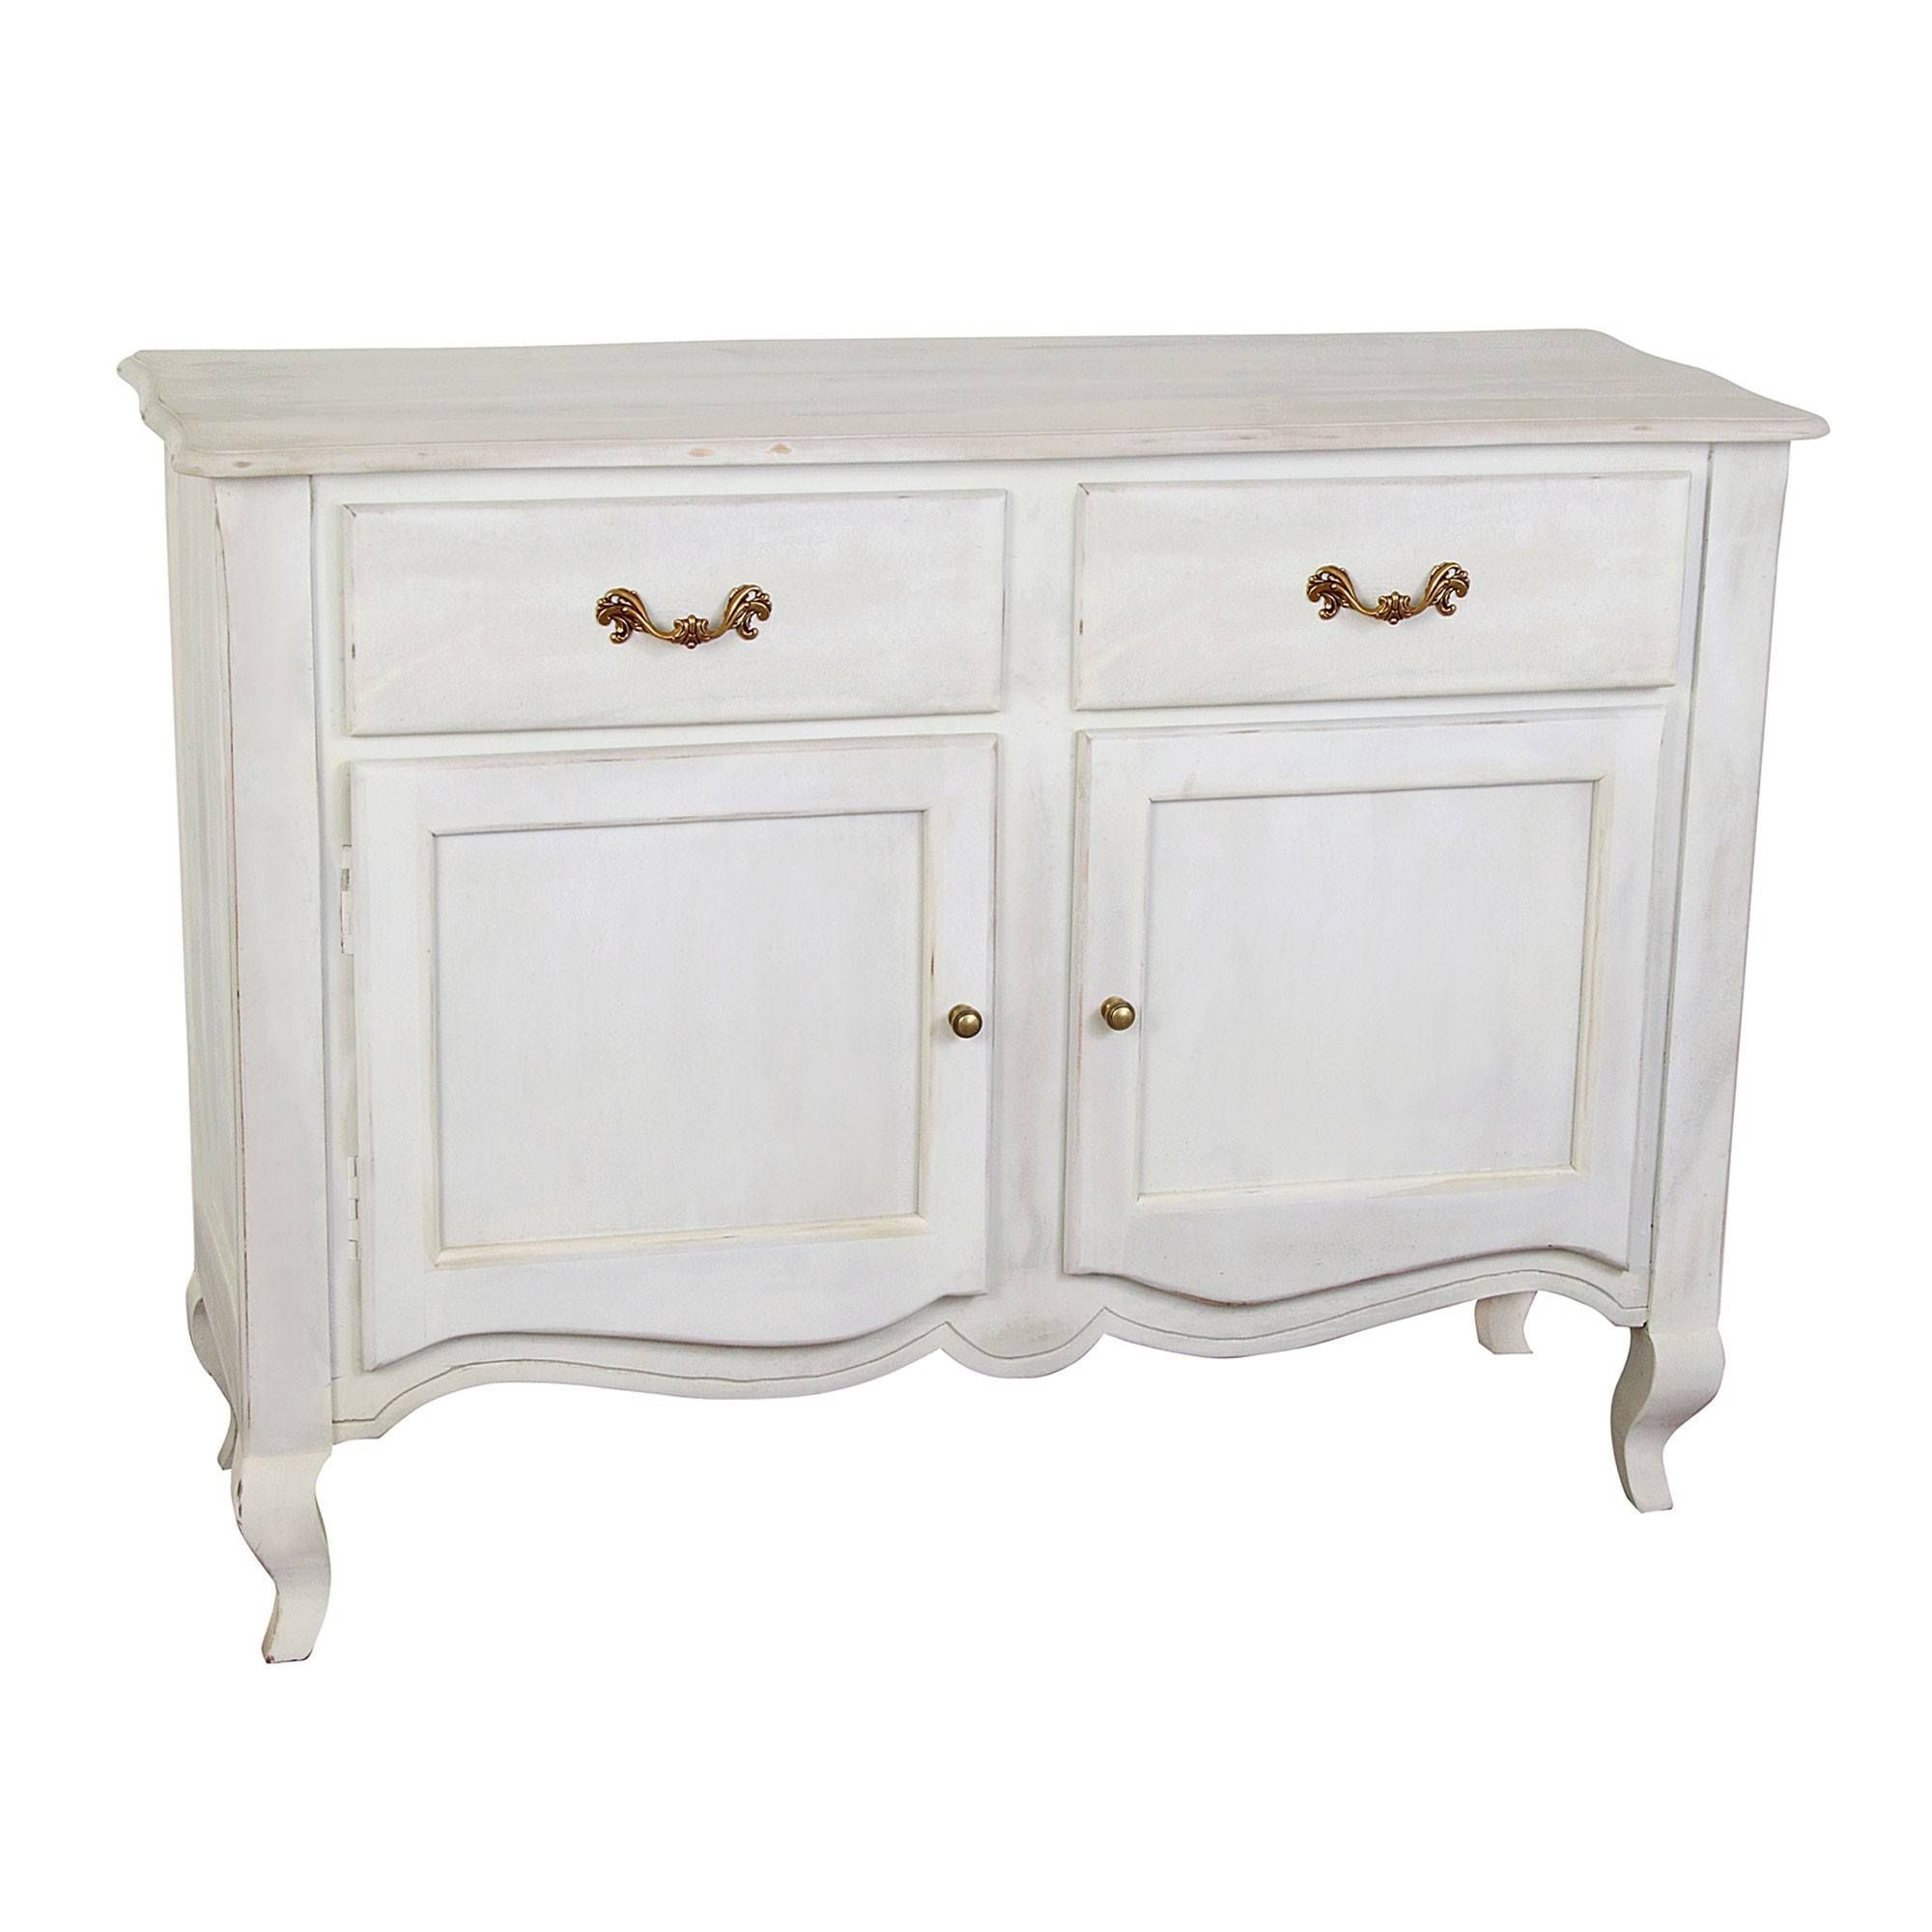 New Orleans Distressed White Finish Vintage Sideboard – Homescapes In White Distressed Finish Sideboards (View 6 of 30)